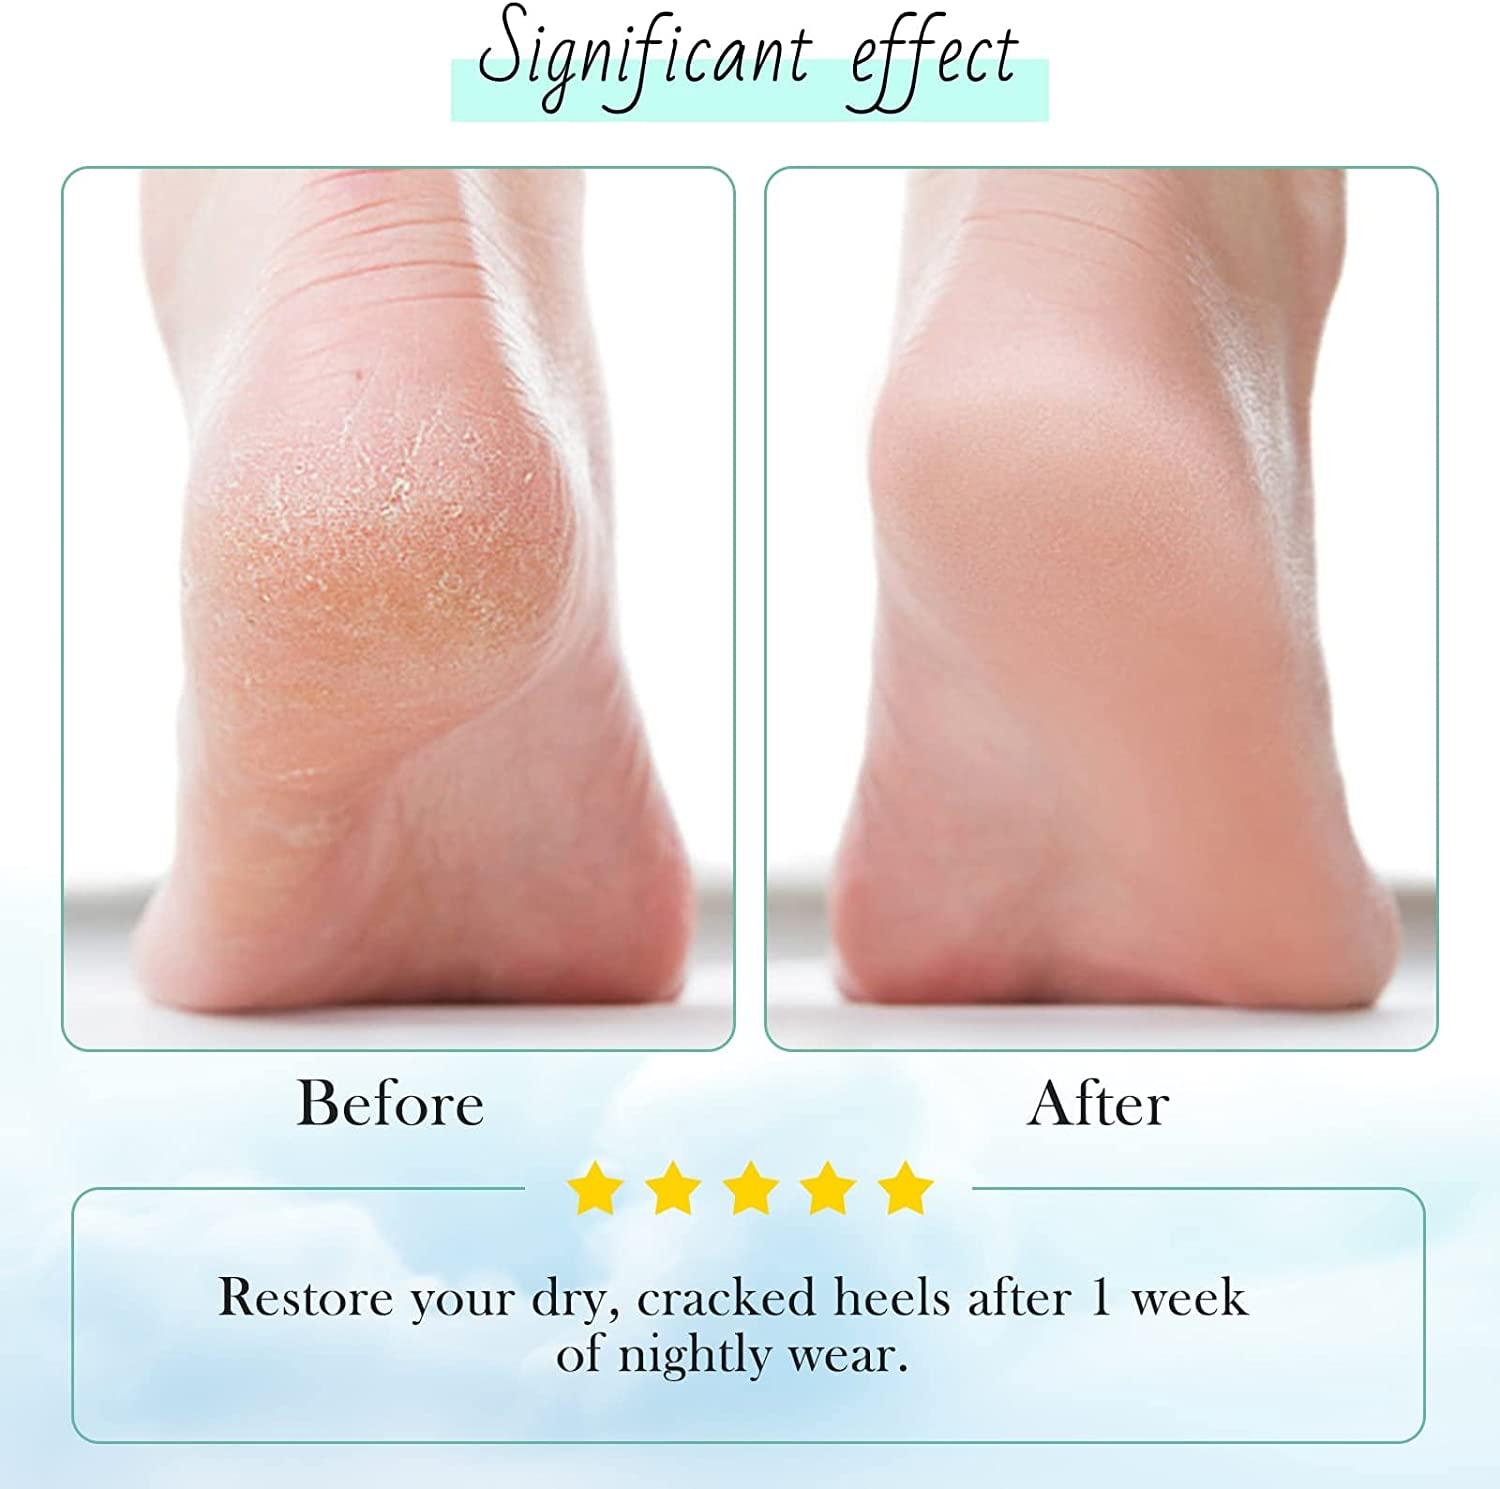 Treating and Repairing Dry Feet and Heels